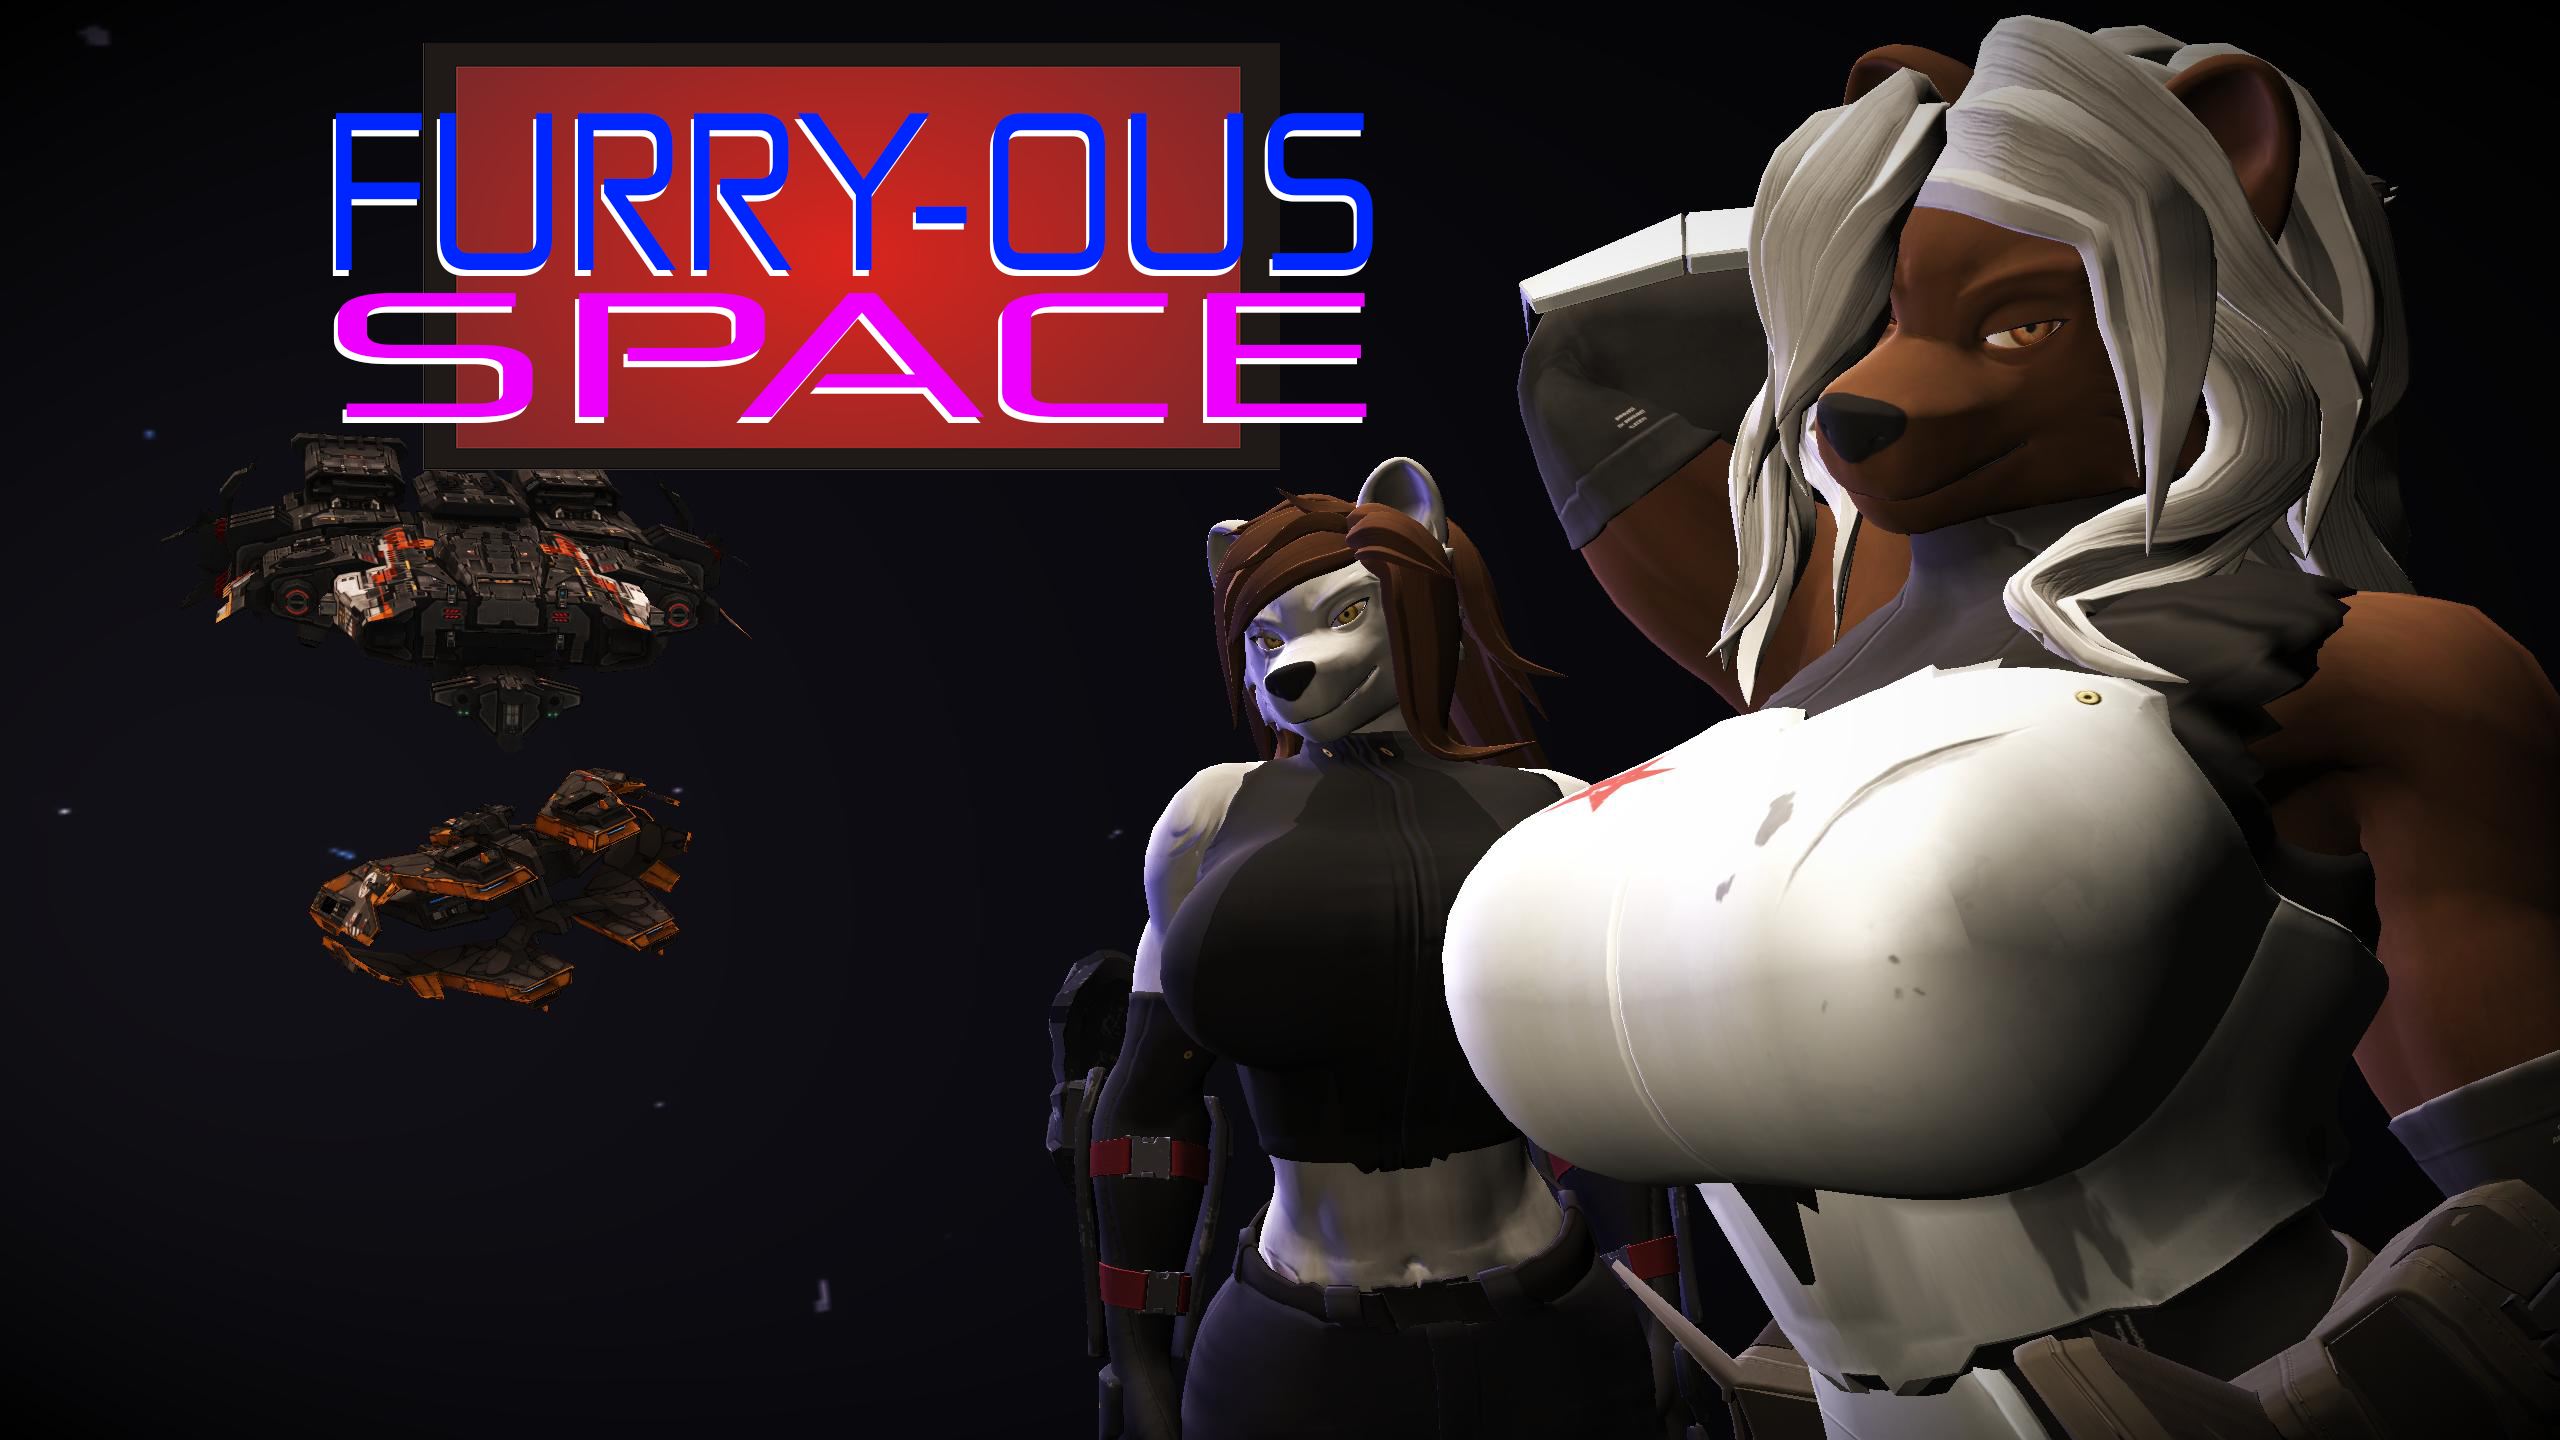 Furry-ous Space porn xxx game download cover